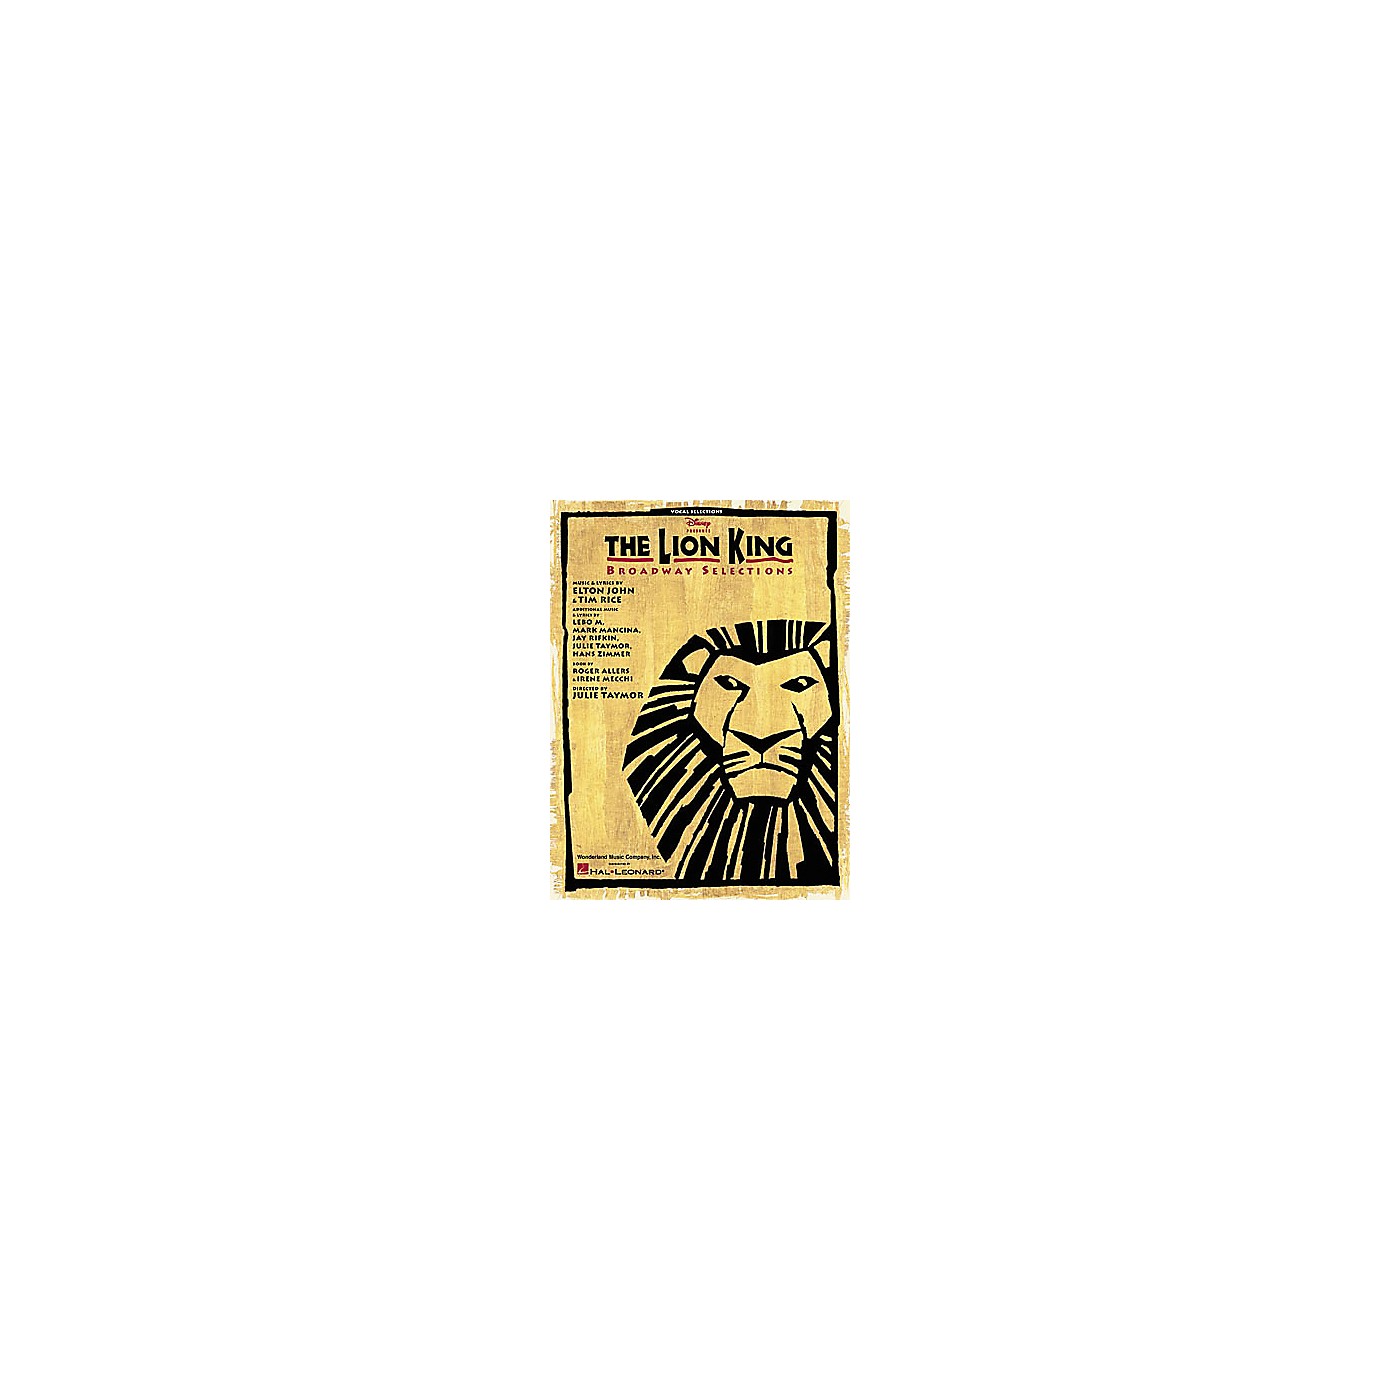 Hal Leonard The Lion King Broadway Selections Piano/Vocal/Guitar Songbook thumbnail